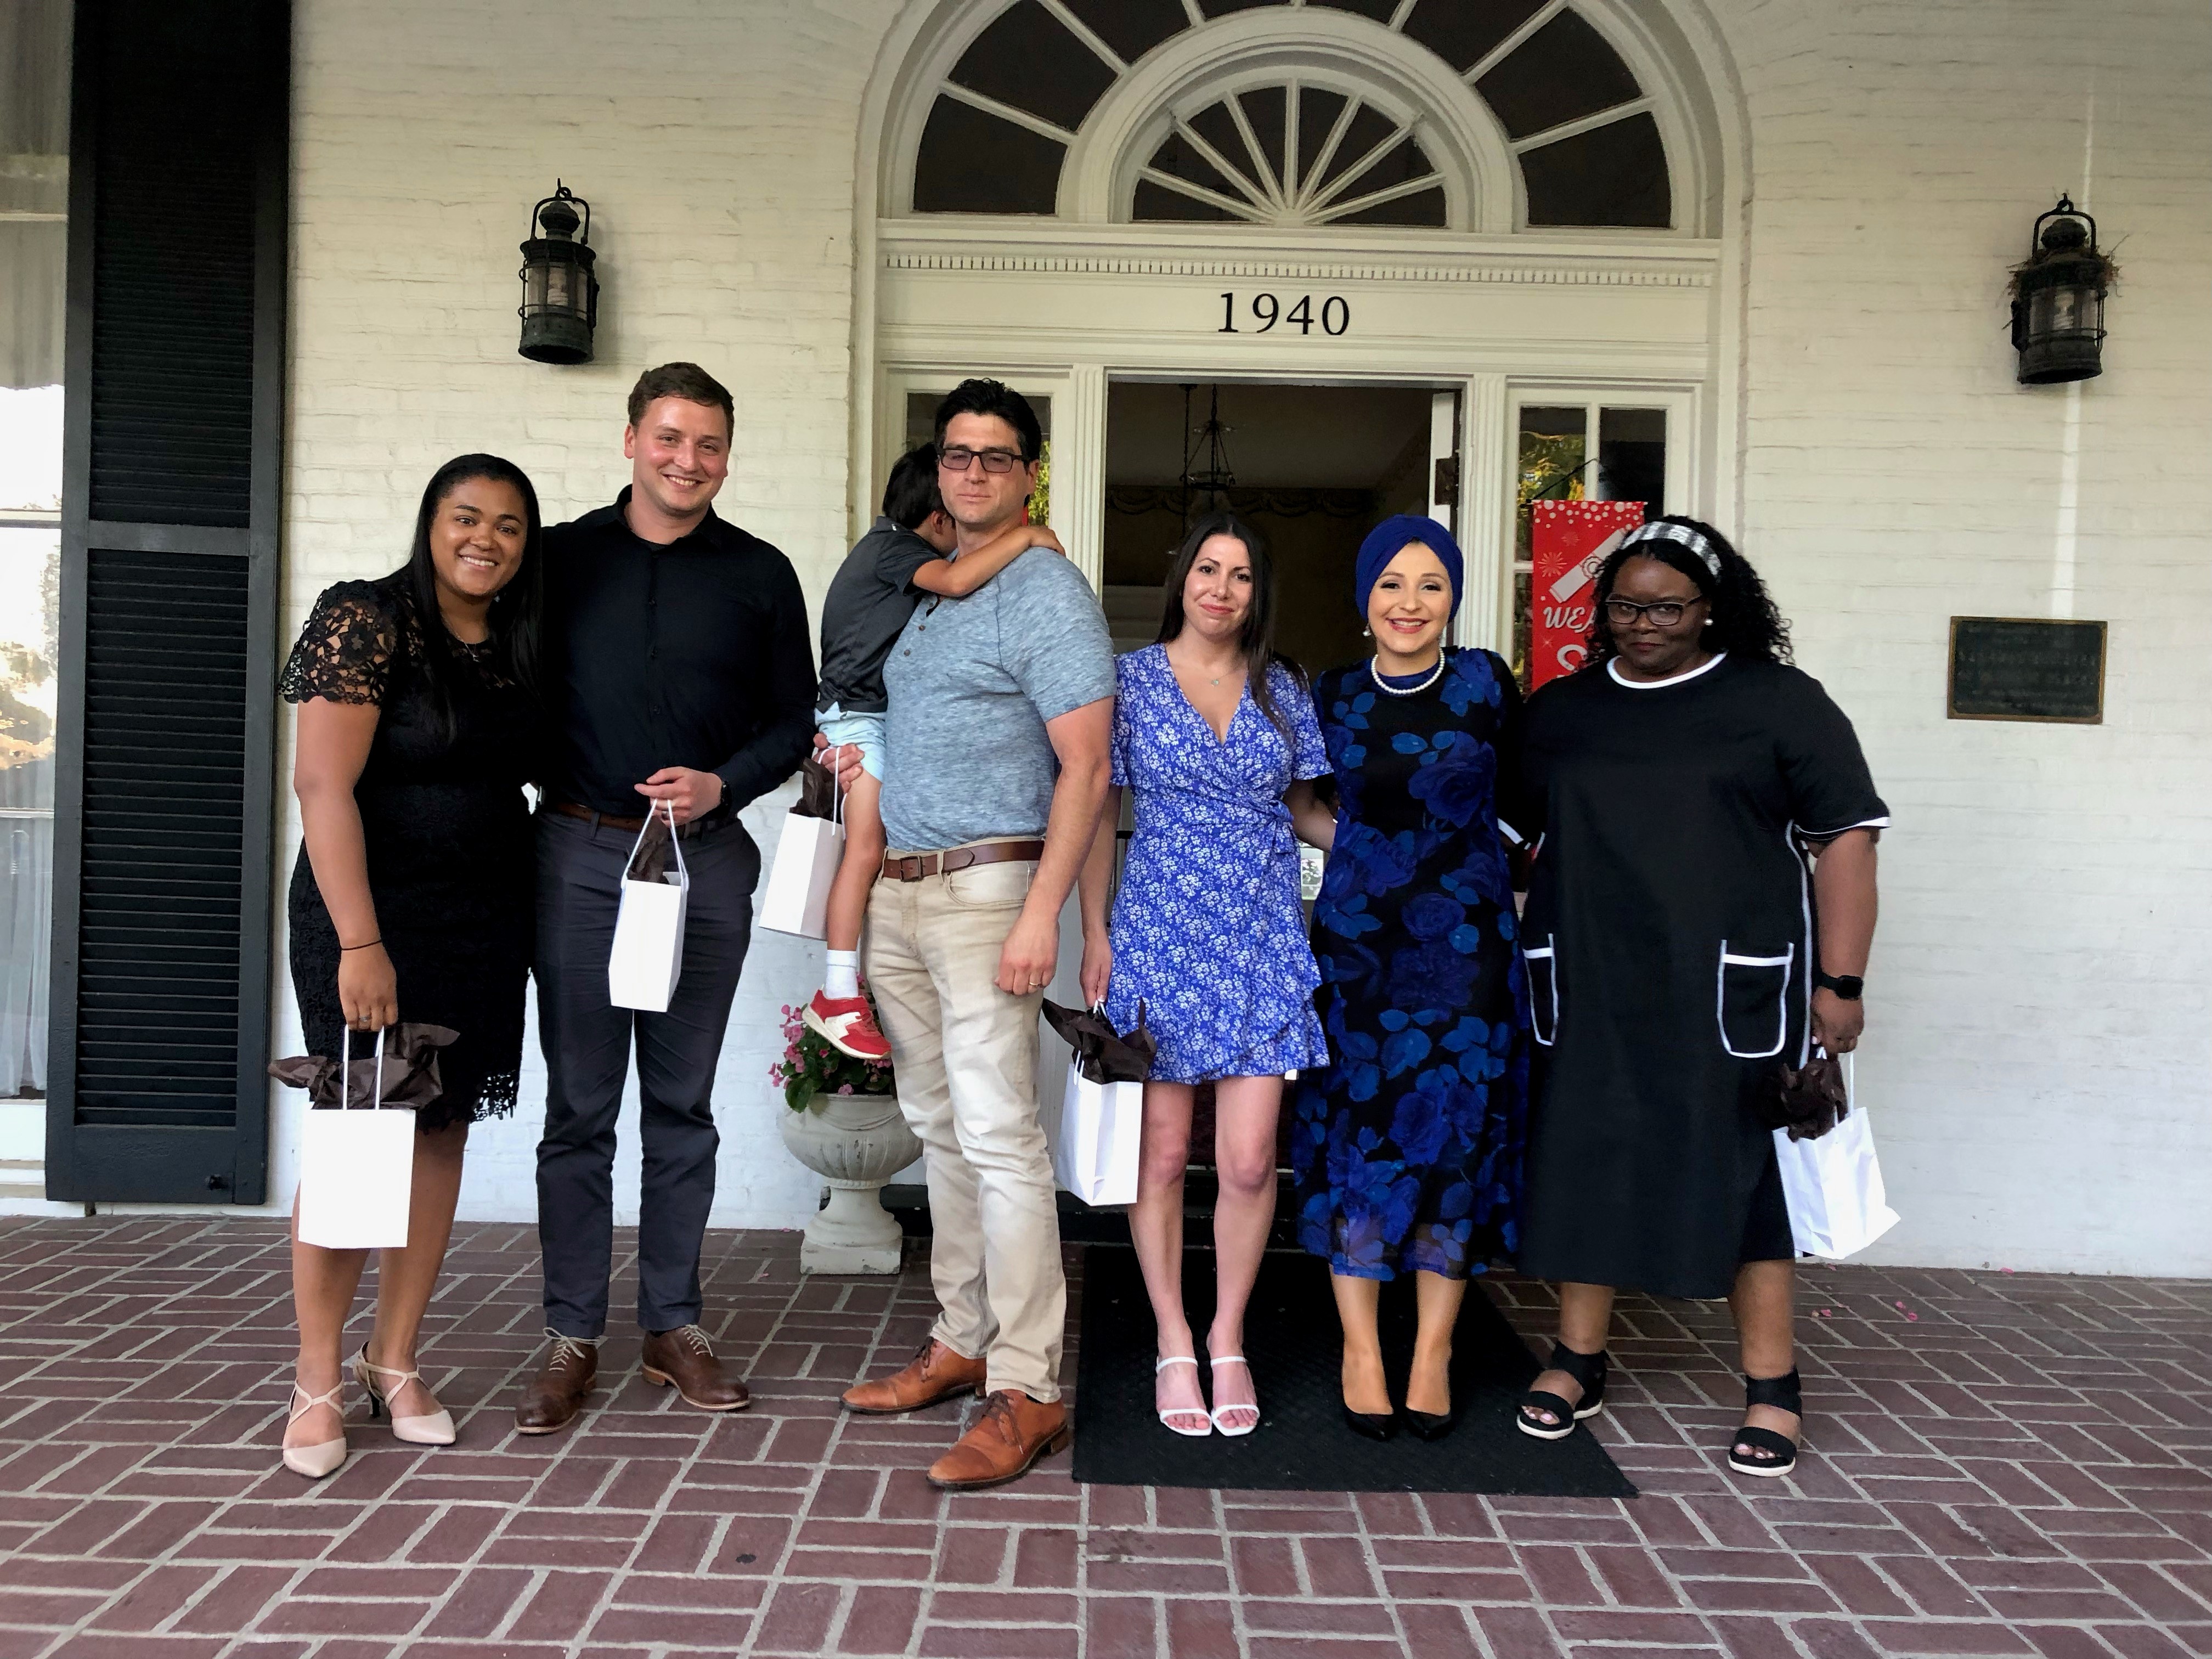 Residents leaving the UL psychiatry residency program. They are standing on the front porch of the Nunnlea House, where the resident graduation took place.